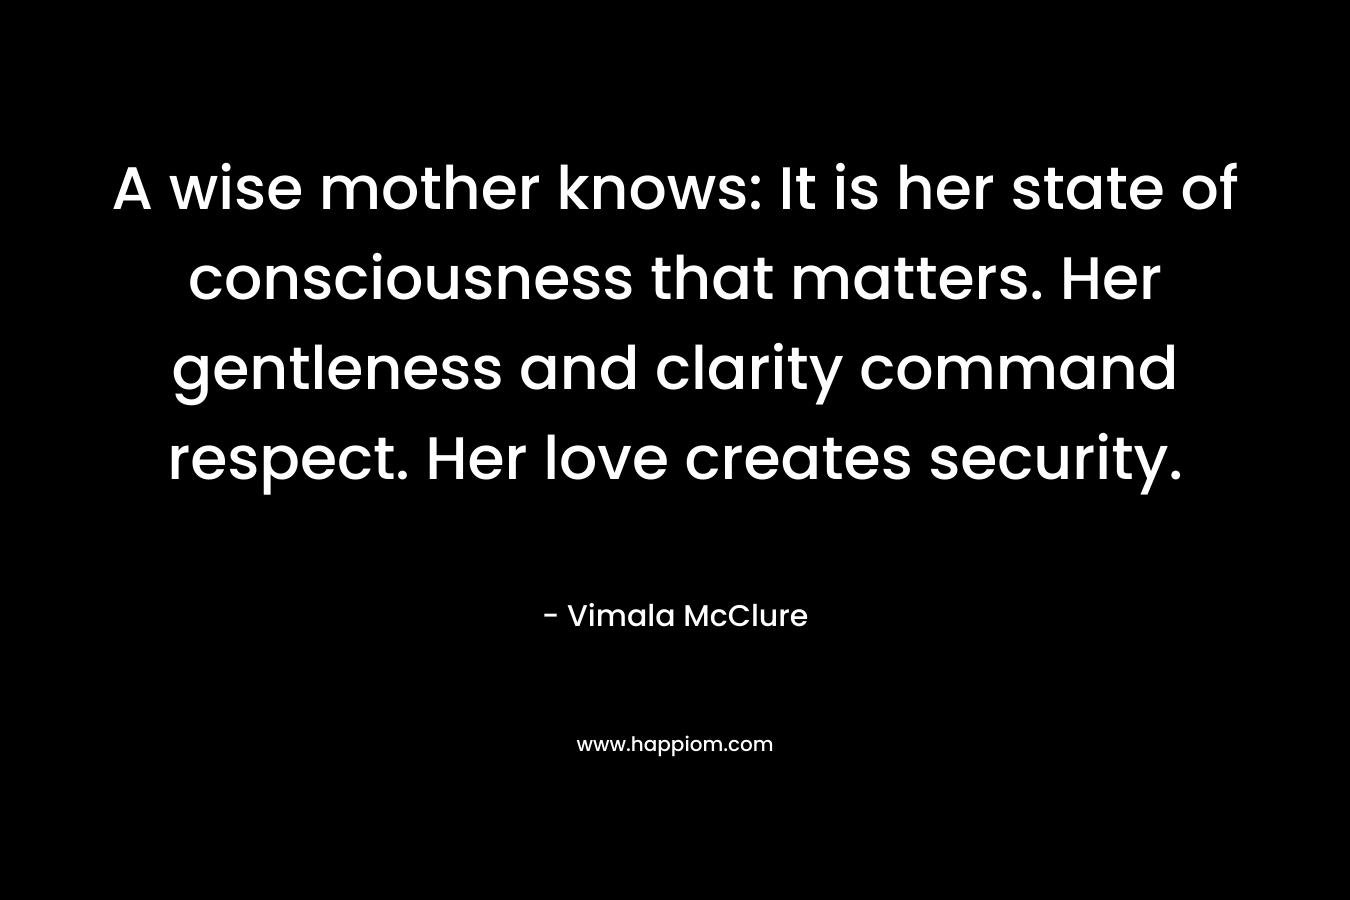 A wise mother knows: It is her state of consciousness that matters. Her gentleness and clarity command respect. Her love creates security. – Vimala McClure